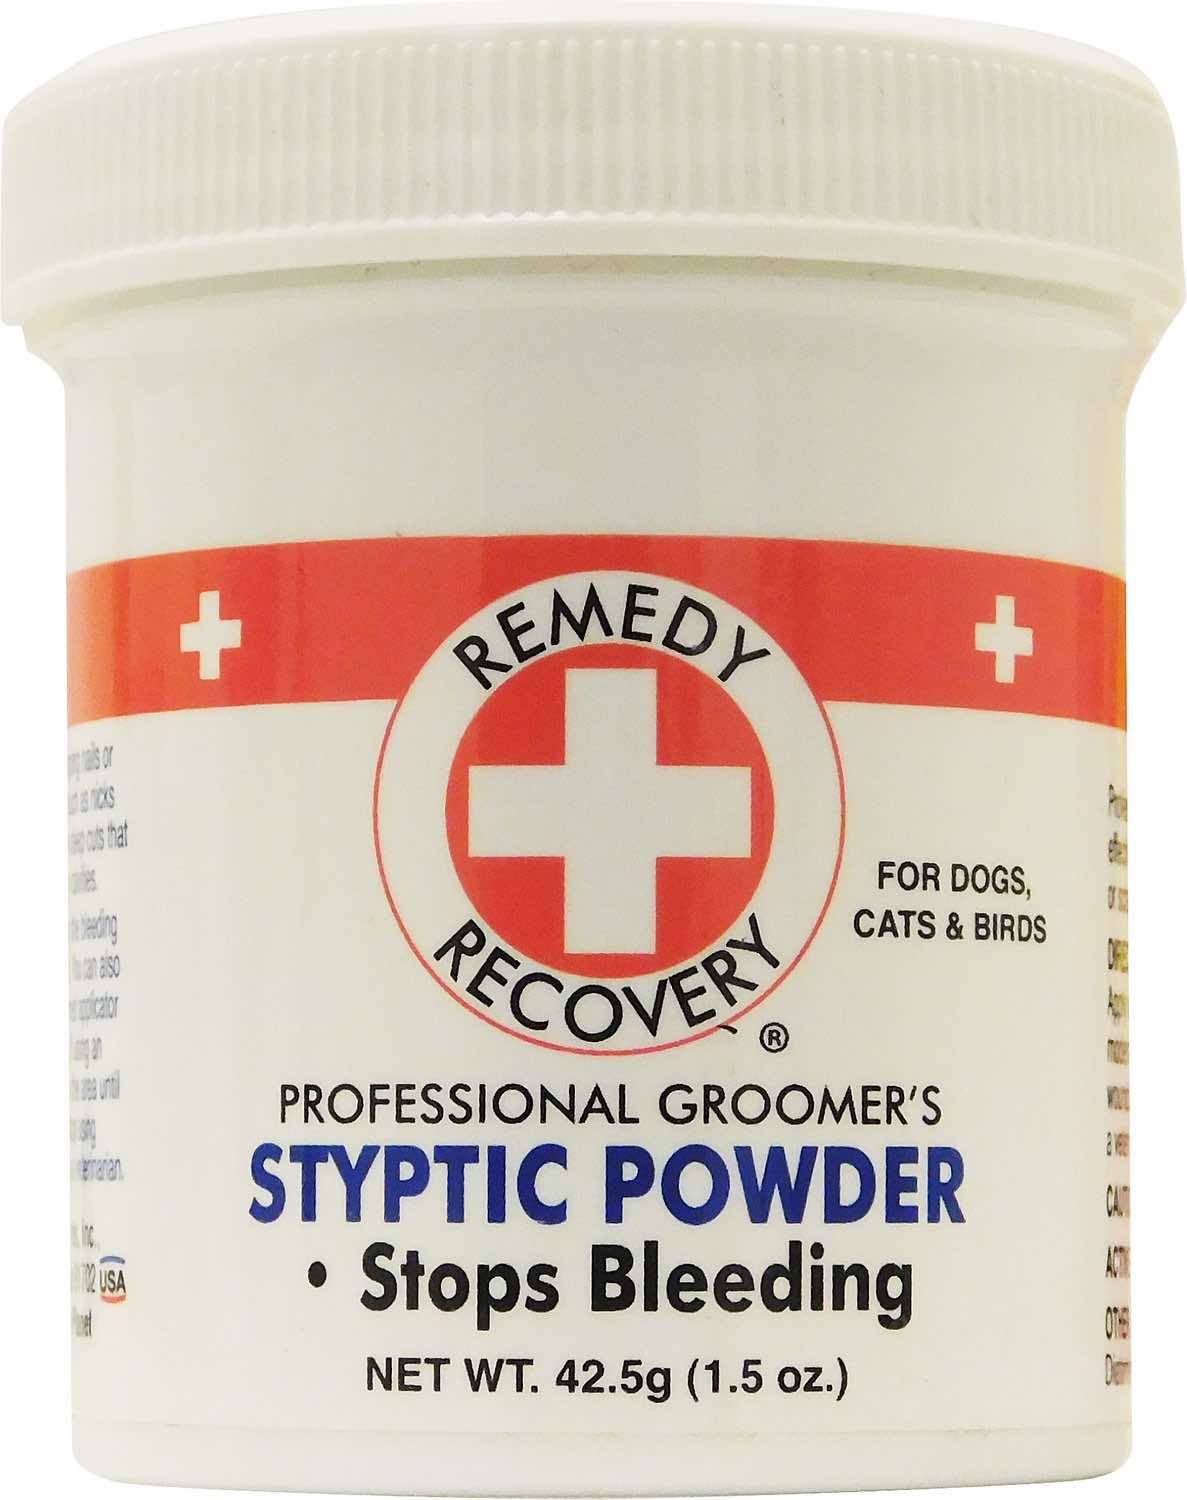 Remedy+Recovery Professional Groomer's Styptic Powder